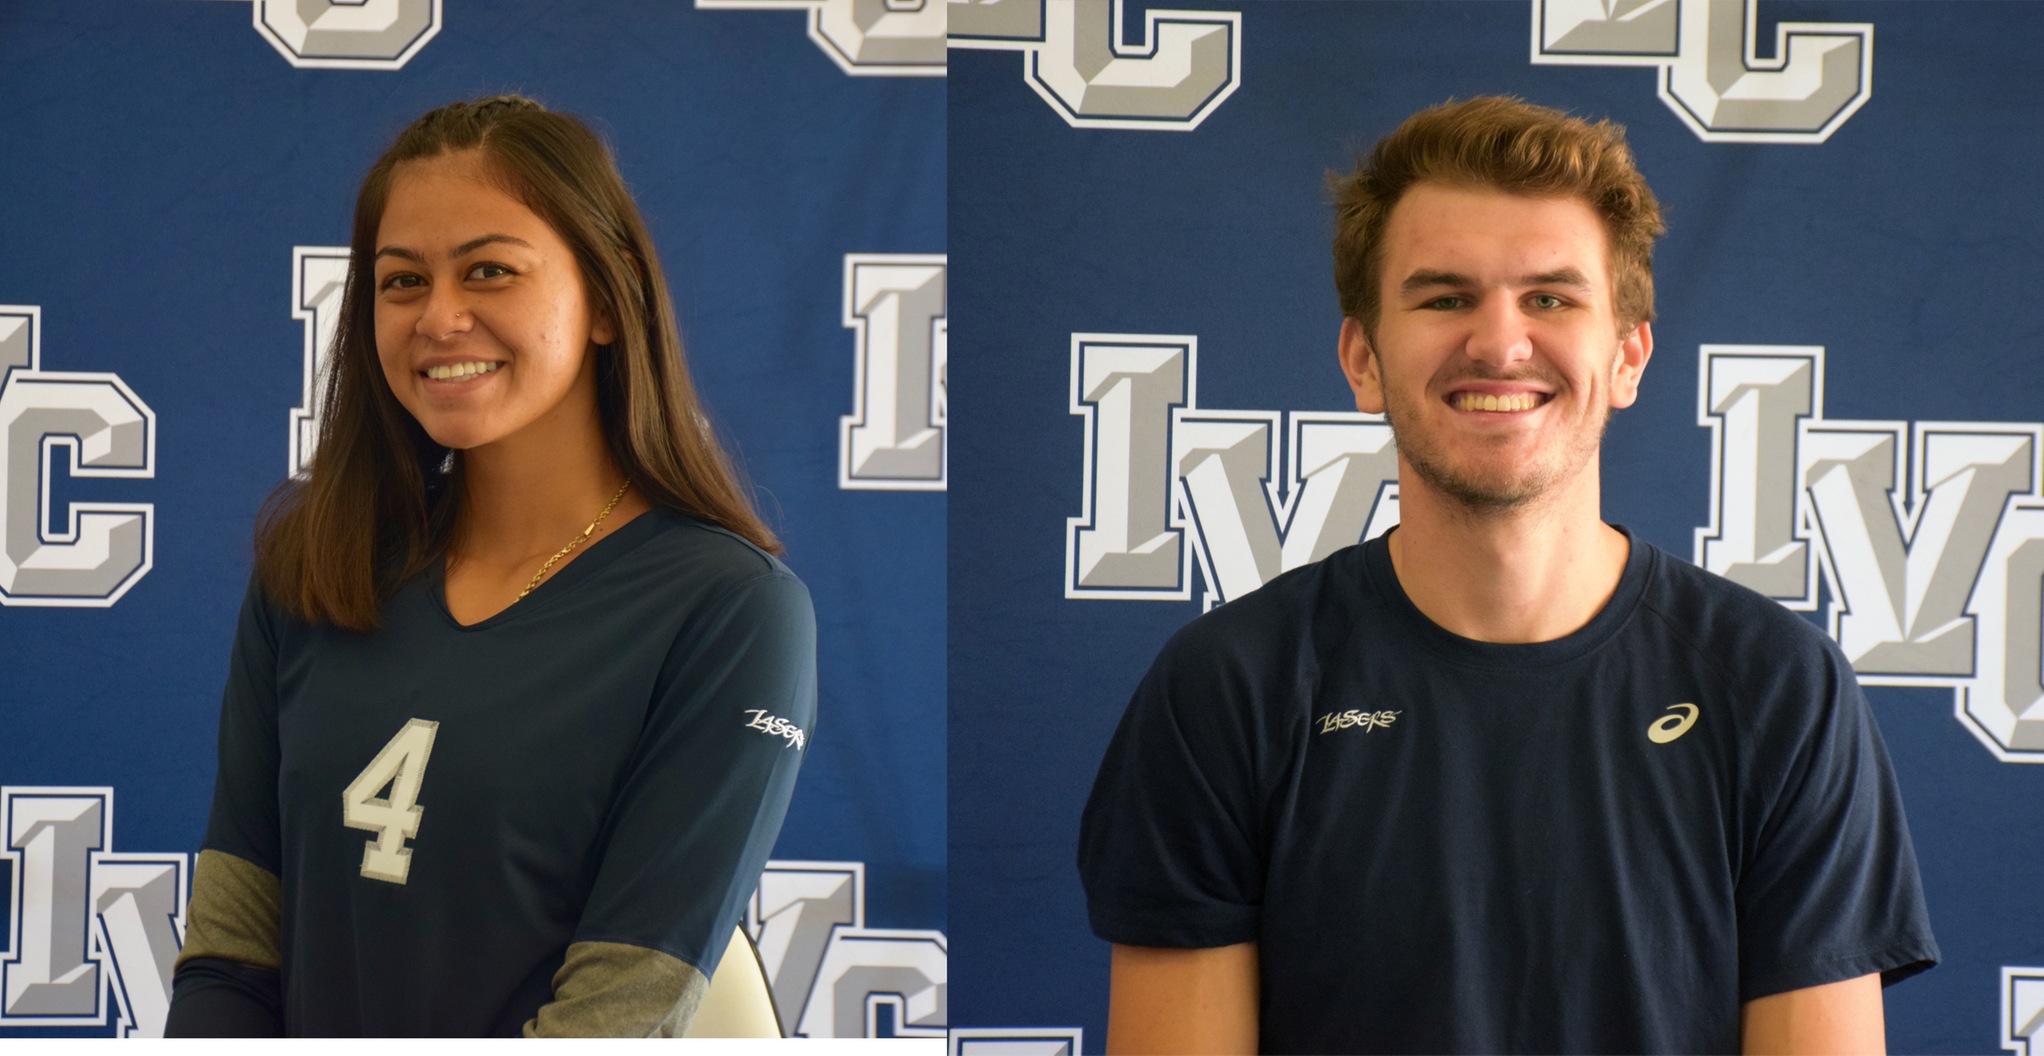 Ka'awaloa and August named Irvine Valley's athletes of the year